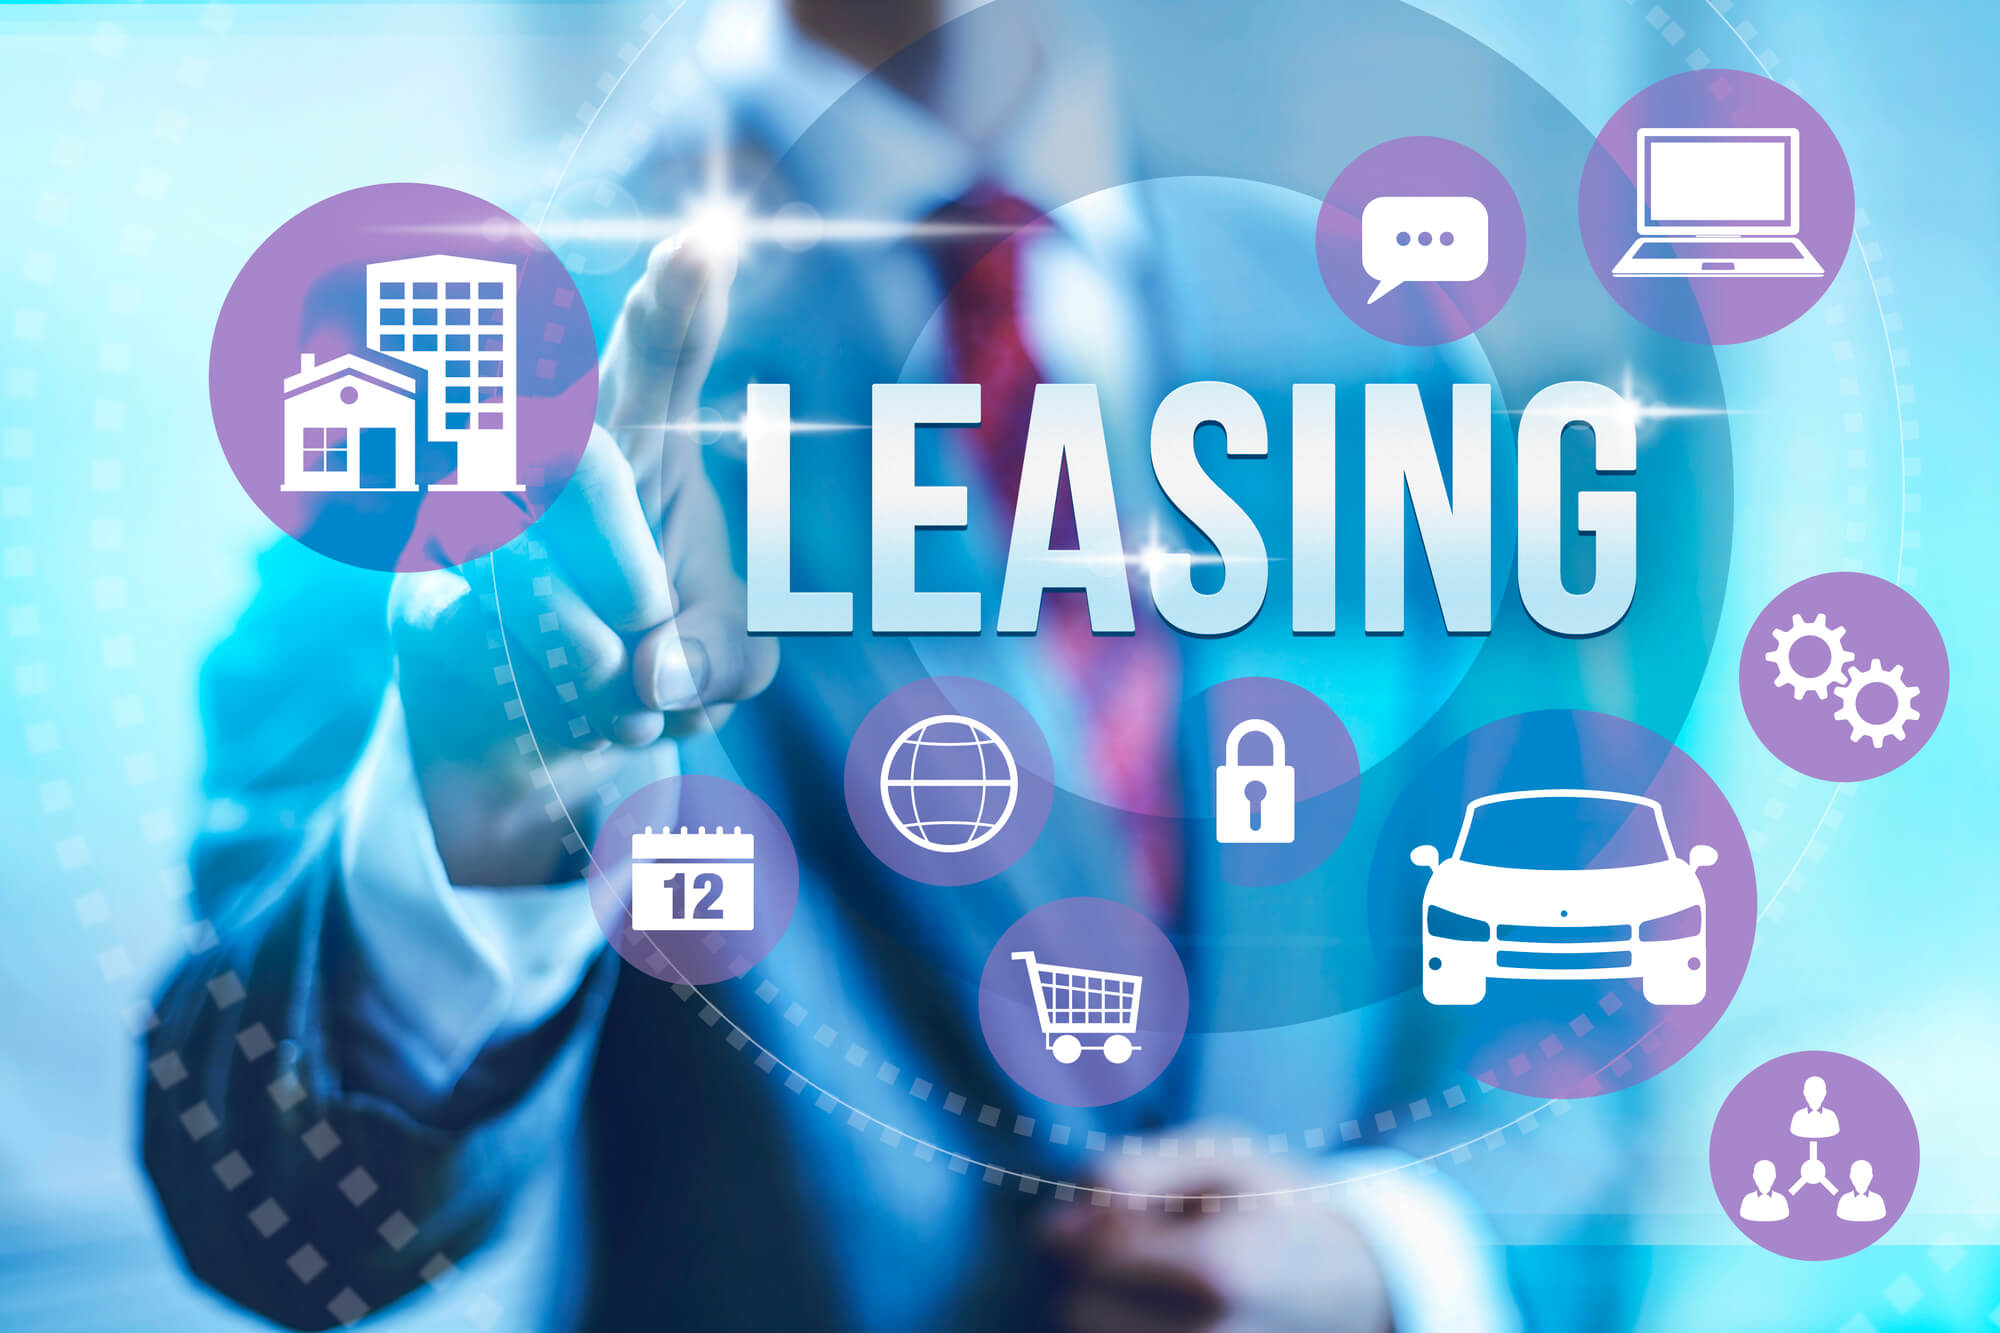 Alternative 2 leasing or Leasing which is better â€“ Business Fleet Services